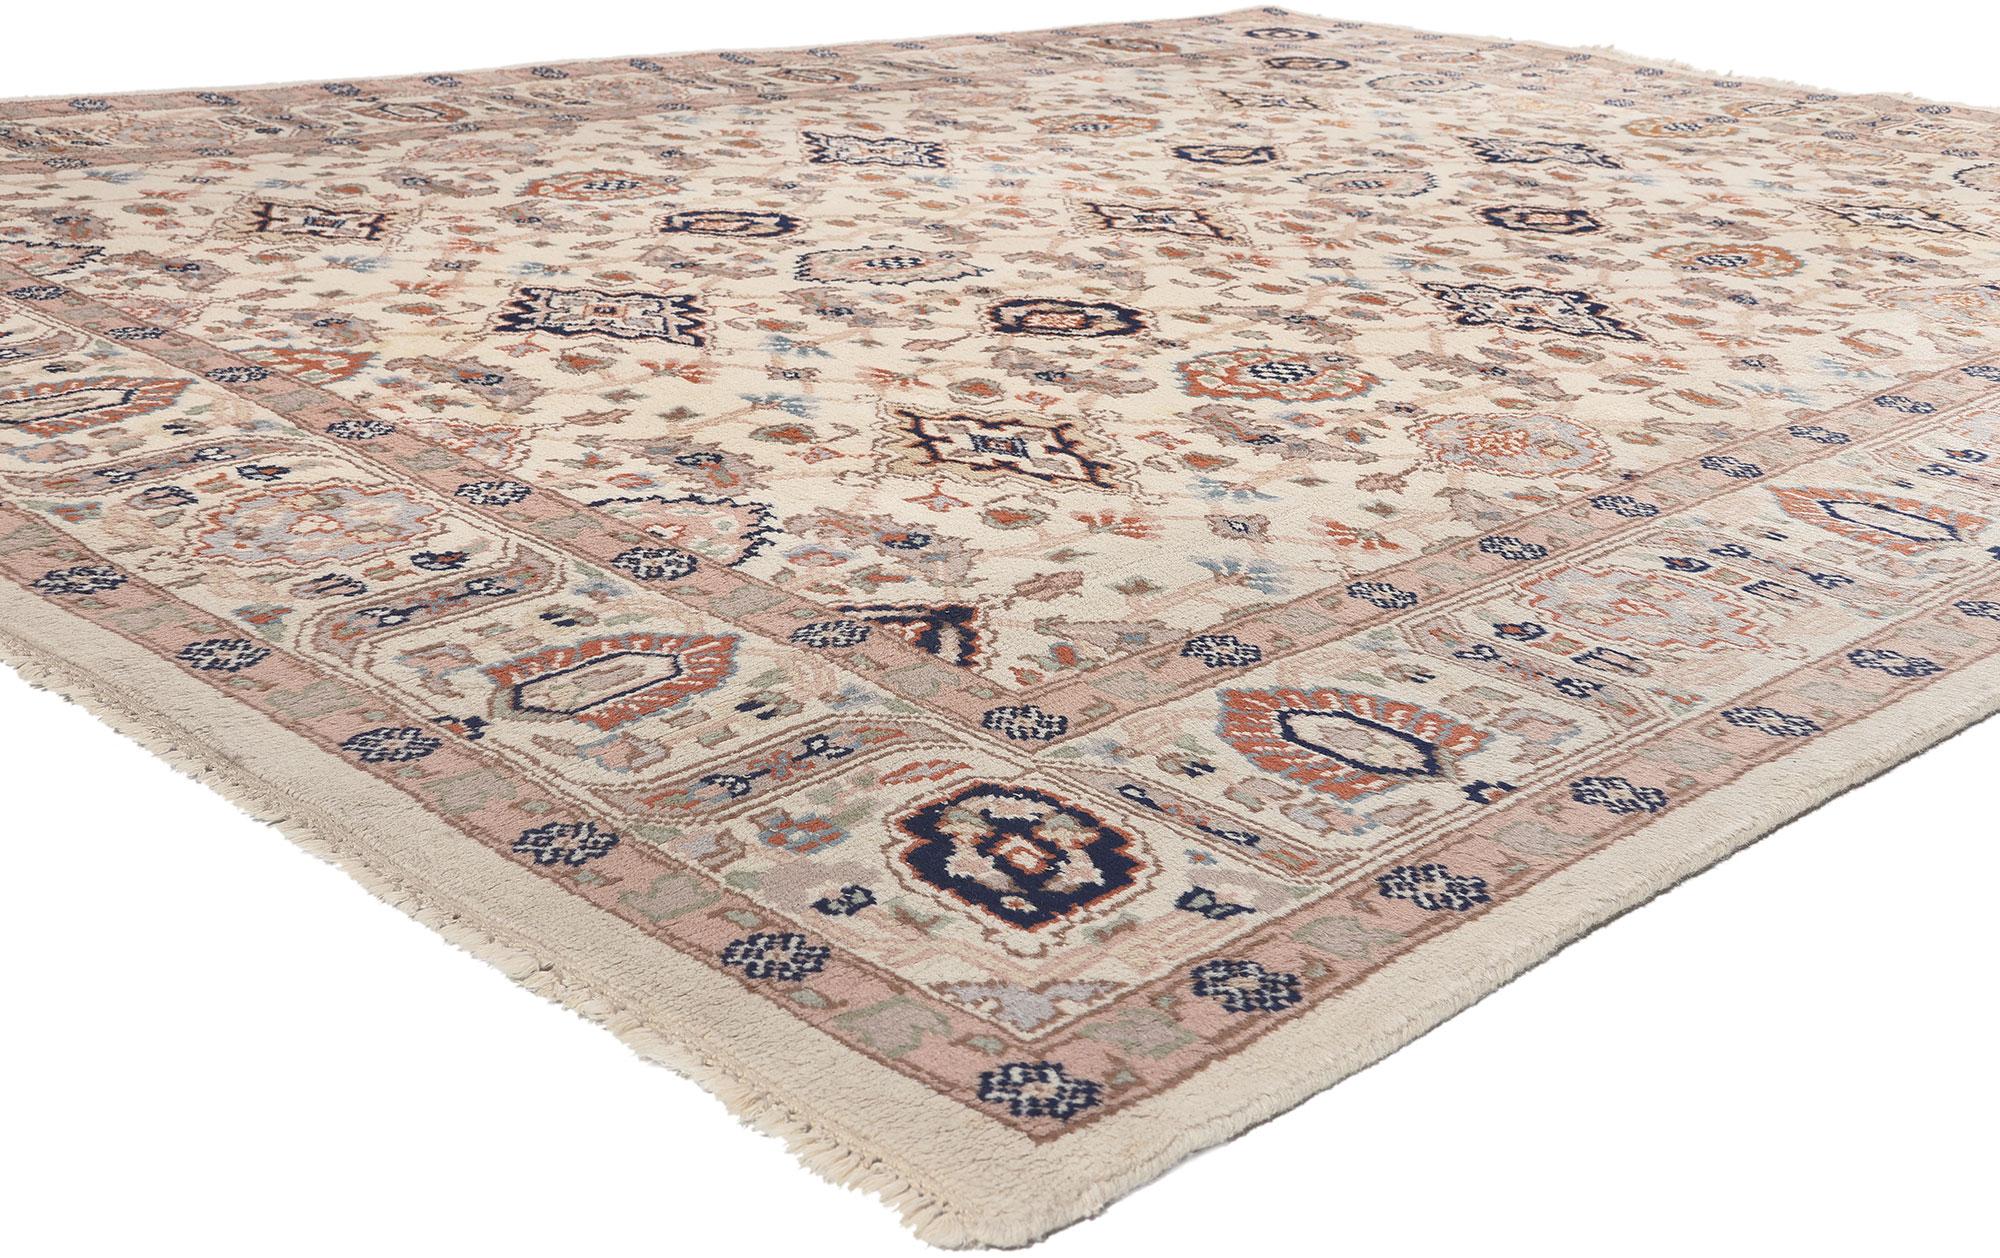 77340 Vintage Indian Tabriz Rug, 08'04 x 10'10. 
William and Mary style meets transitional design in this hand knotted wool vintage Indian Tabriz rug. The elaborate botanical design and earthy hues woven into this piece work together resulting in a